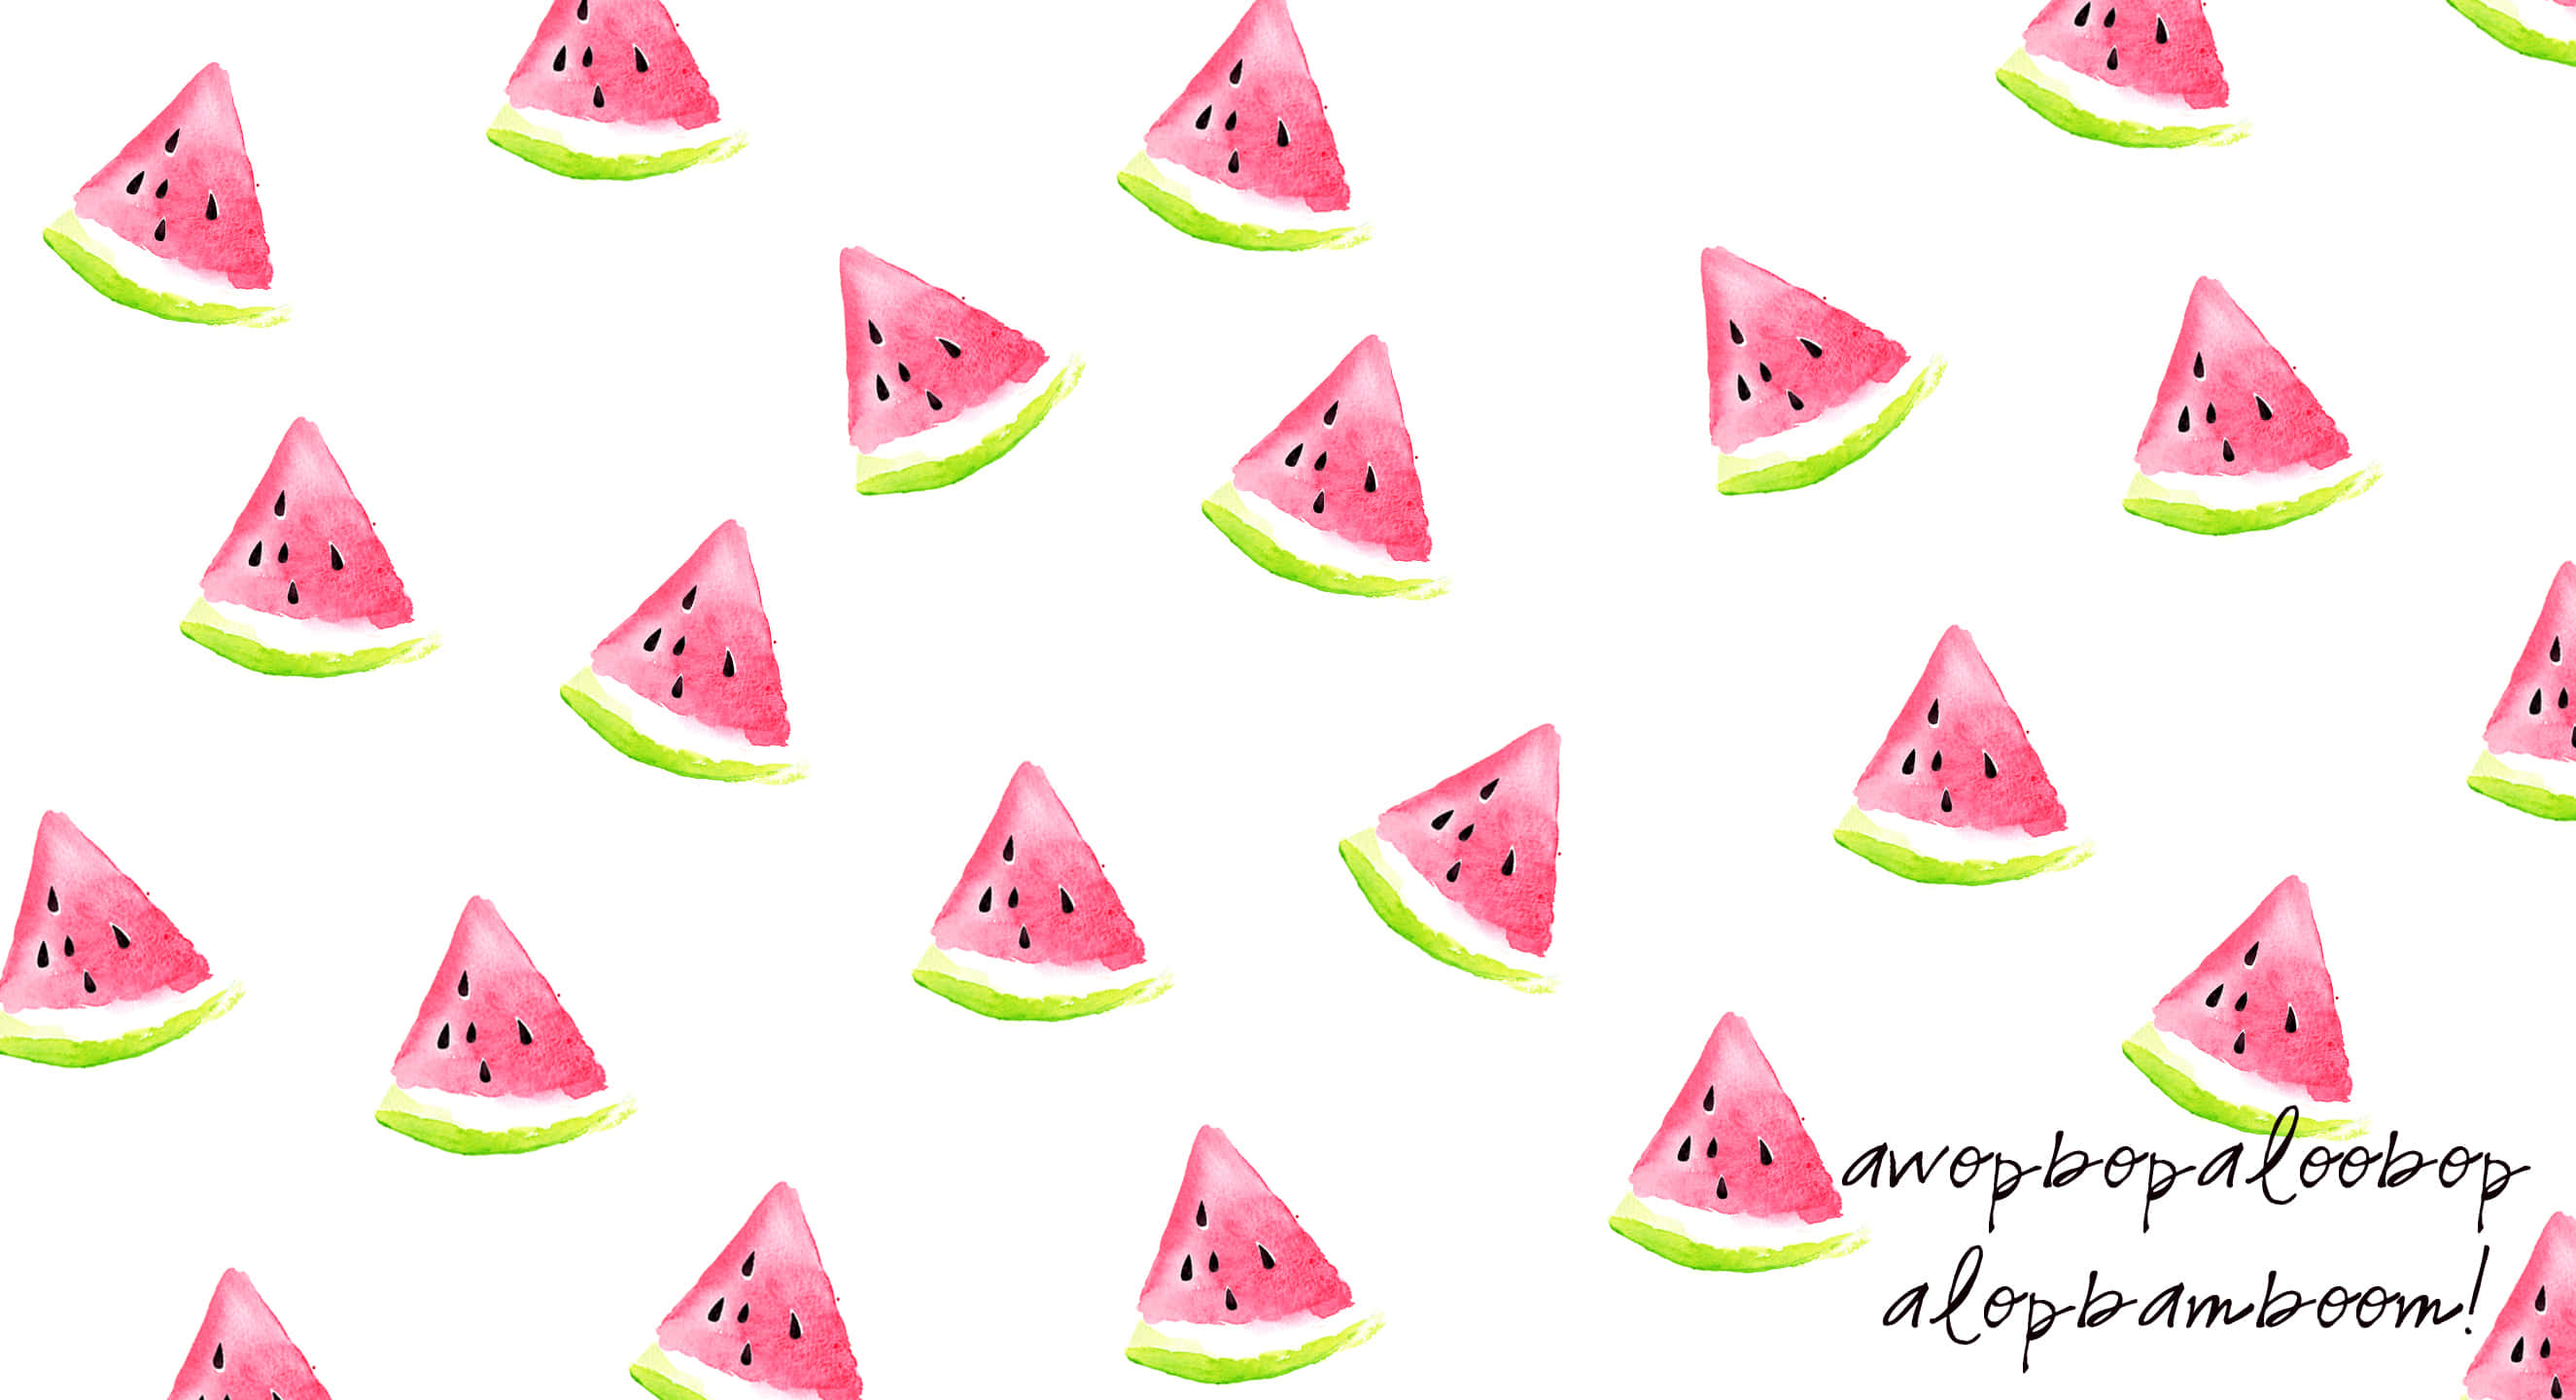 Decorative Numerous Sliced Watermelons Pattern Background